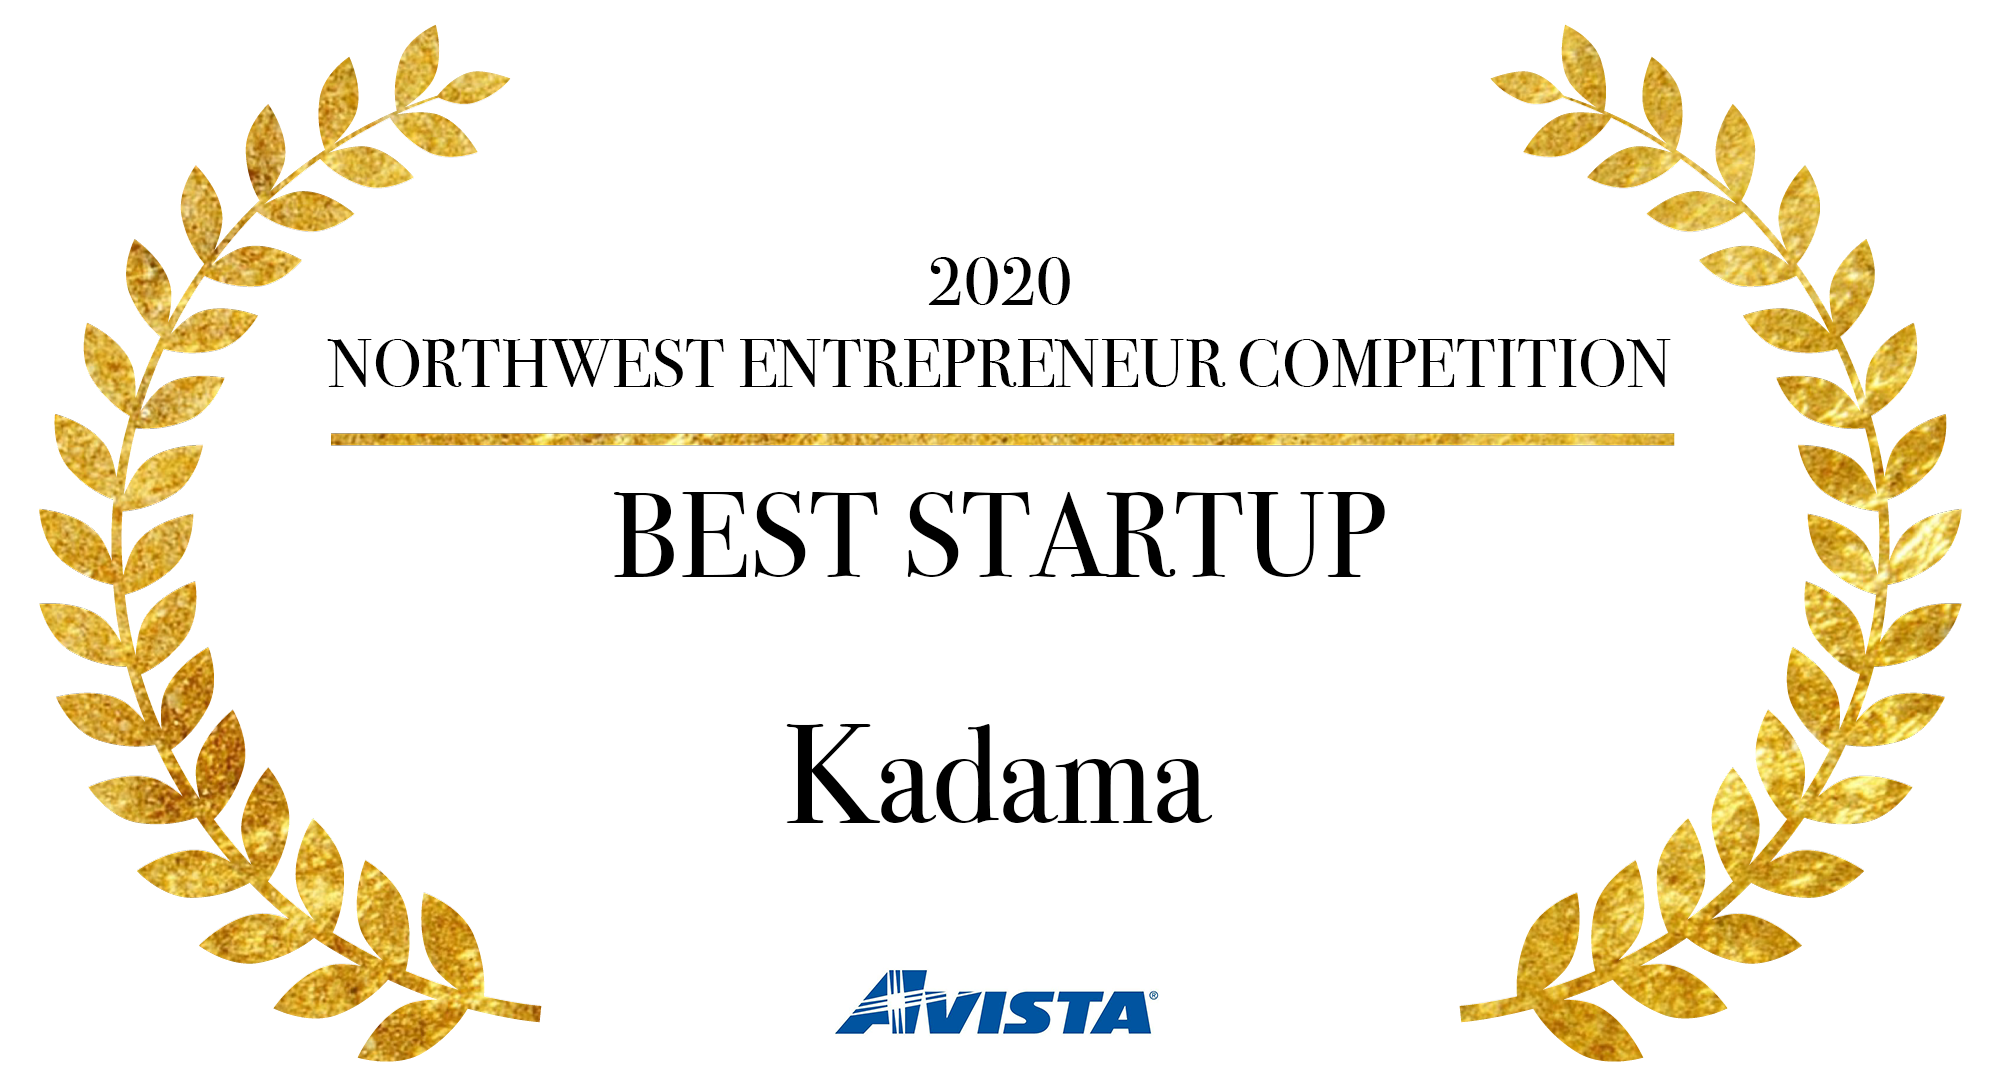 Award announcement for Kadama winning first place and $10k in the Northwest Entreapreneurship Competition